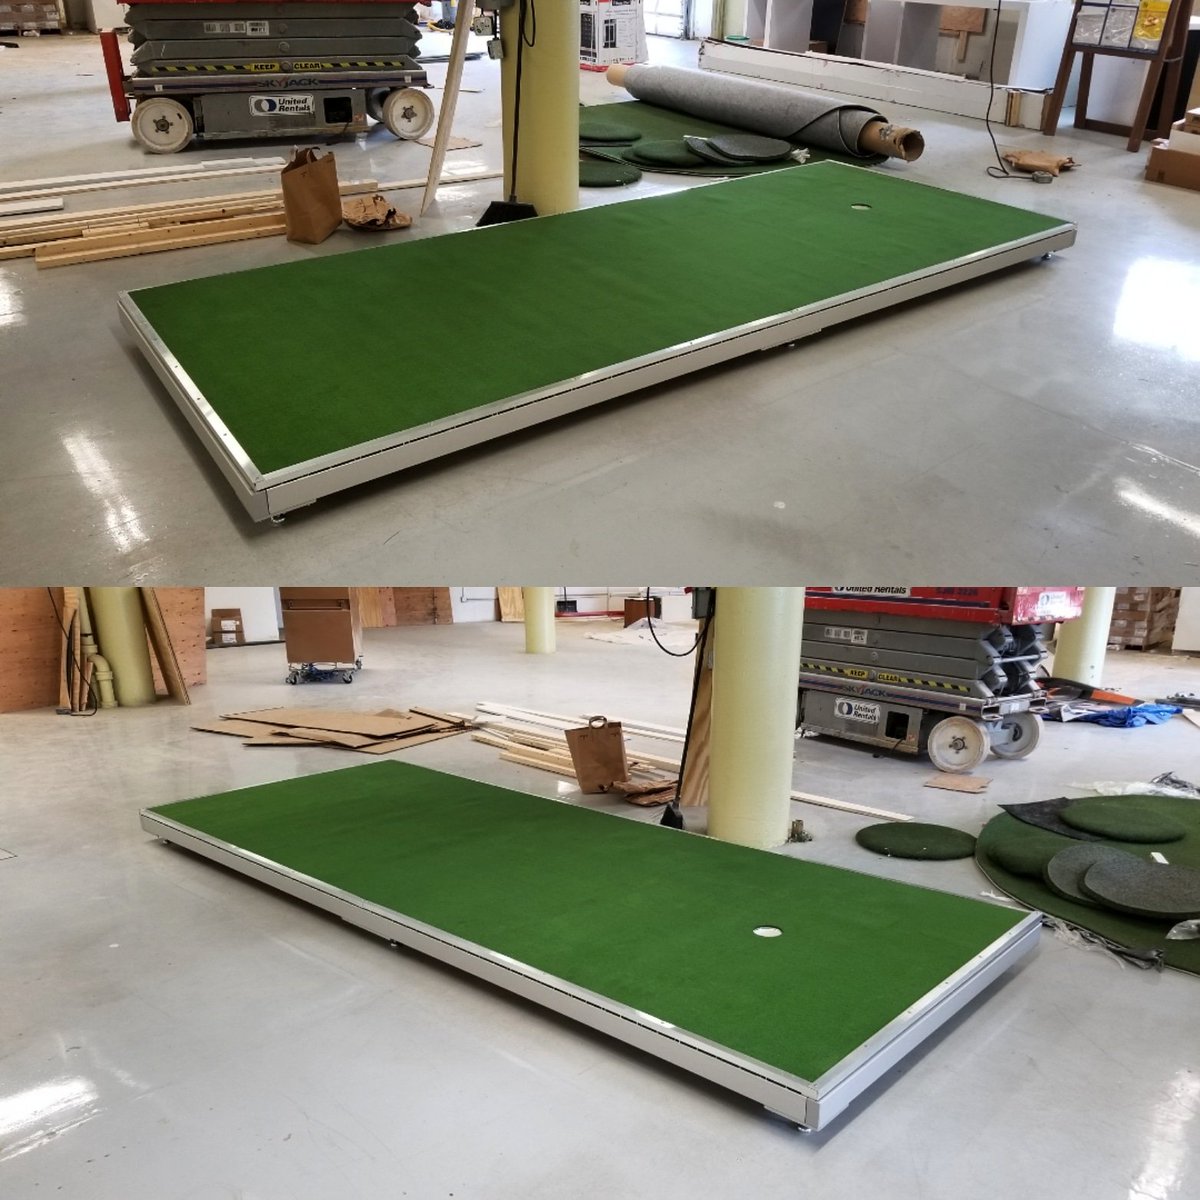 Another @perfectionplatforms build complete for @truespecgolf at their new location in Boston, Massachusetts. Now it's off home for a couple of days then out to Kansas for a synthetic green installation. #rggconsulting⛳ #perfectionplatforms #truespecgolf #fullgrindmode